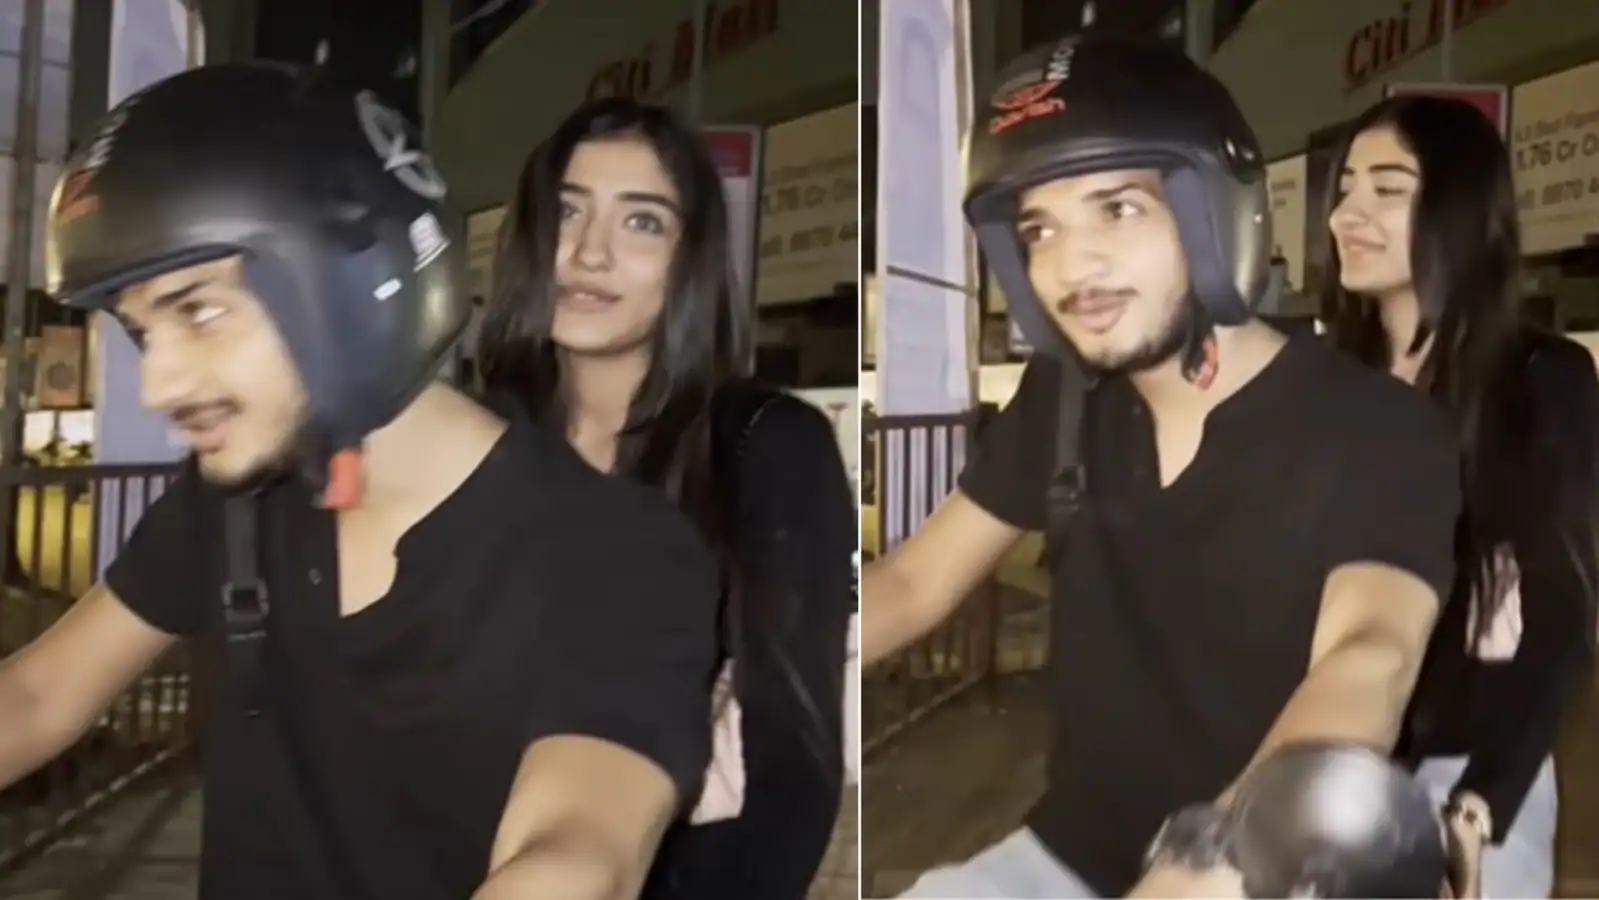 Munawar Faruqui and girlfriend Nazila twin in black as they step out for dinner date, fans call them ‘adorable’. Watch